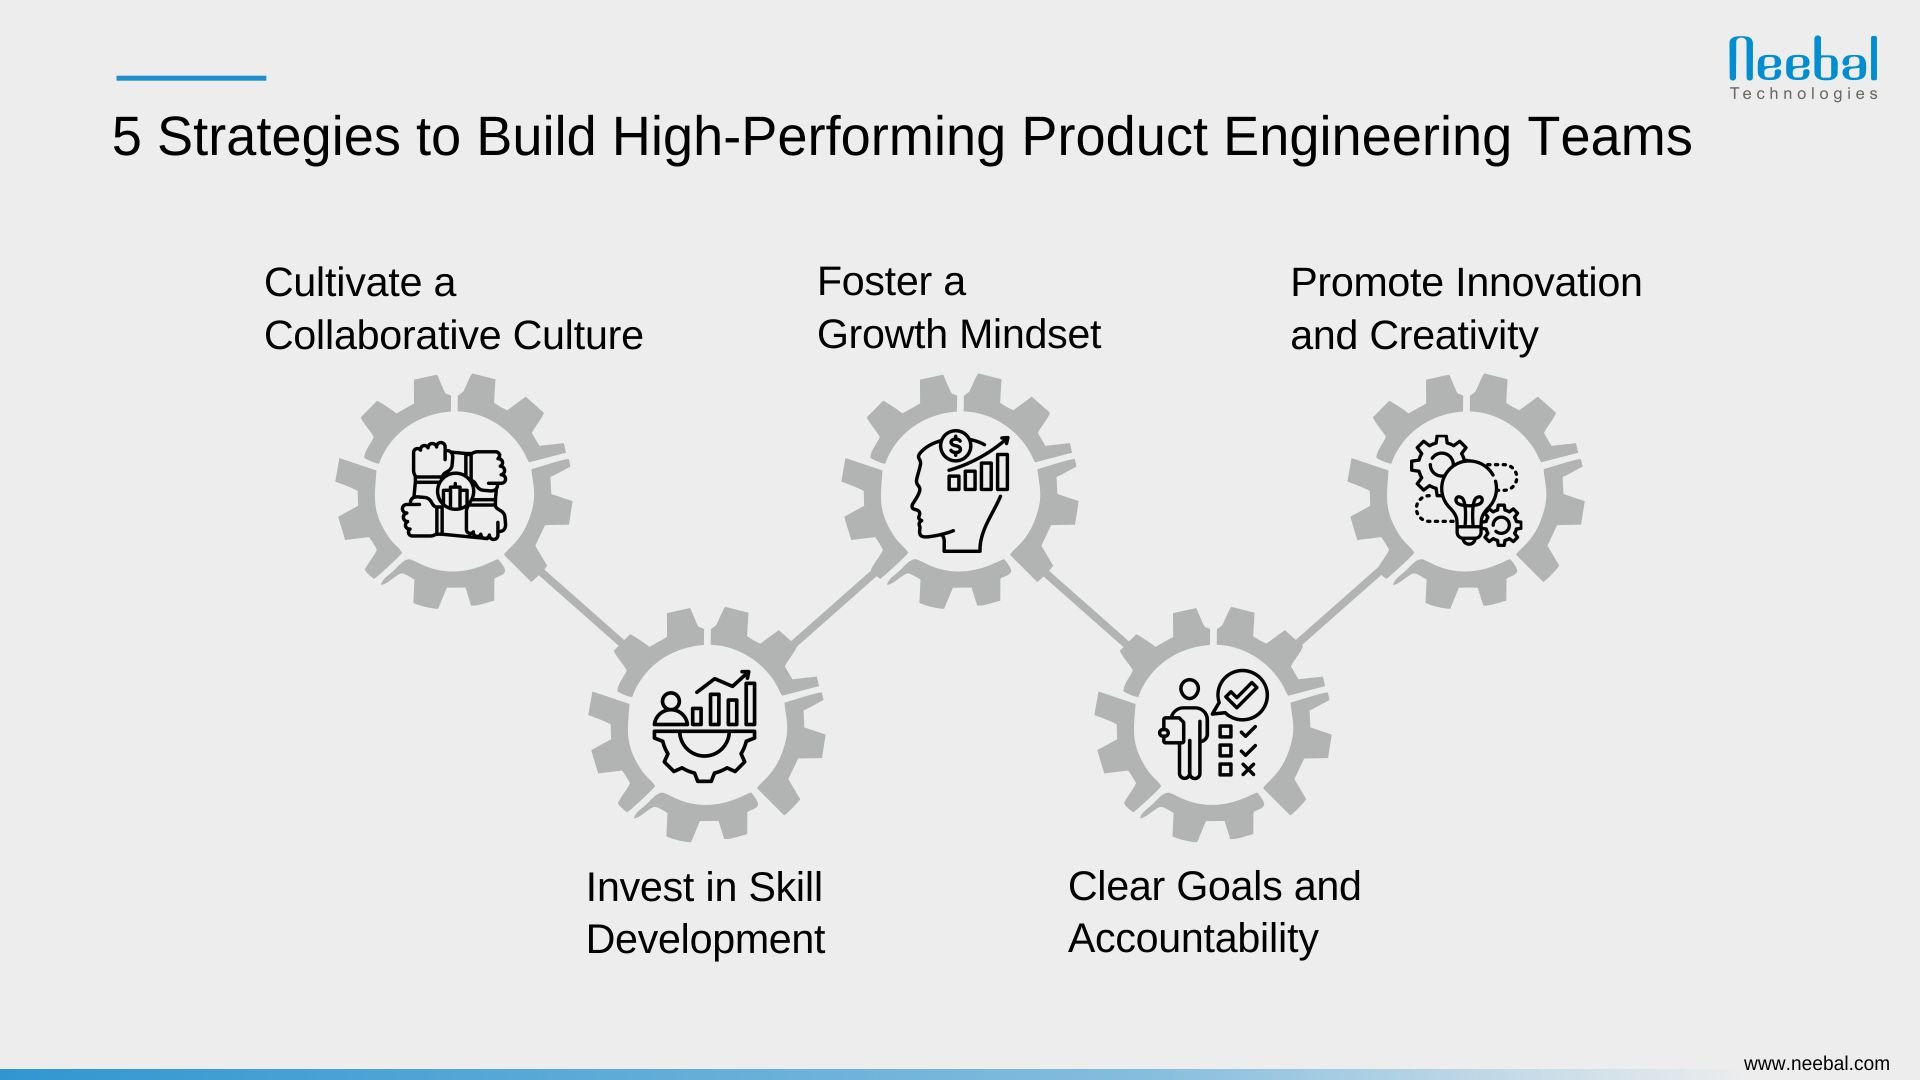 5 strategies to build high-performing product engineering teams - Infographic